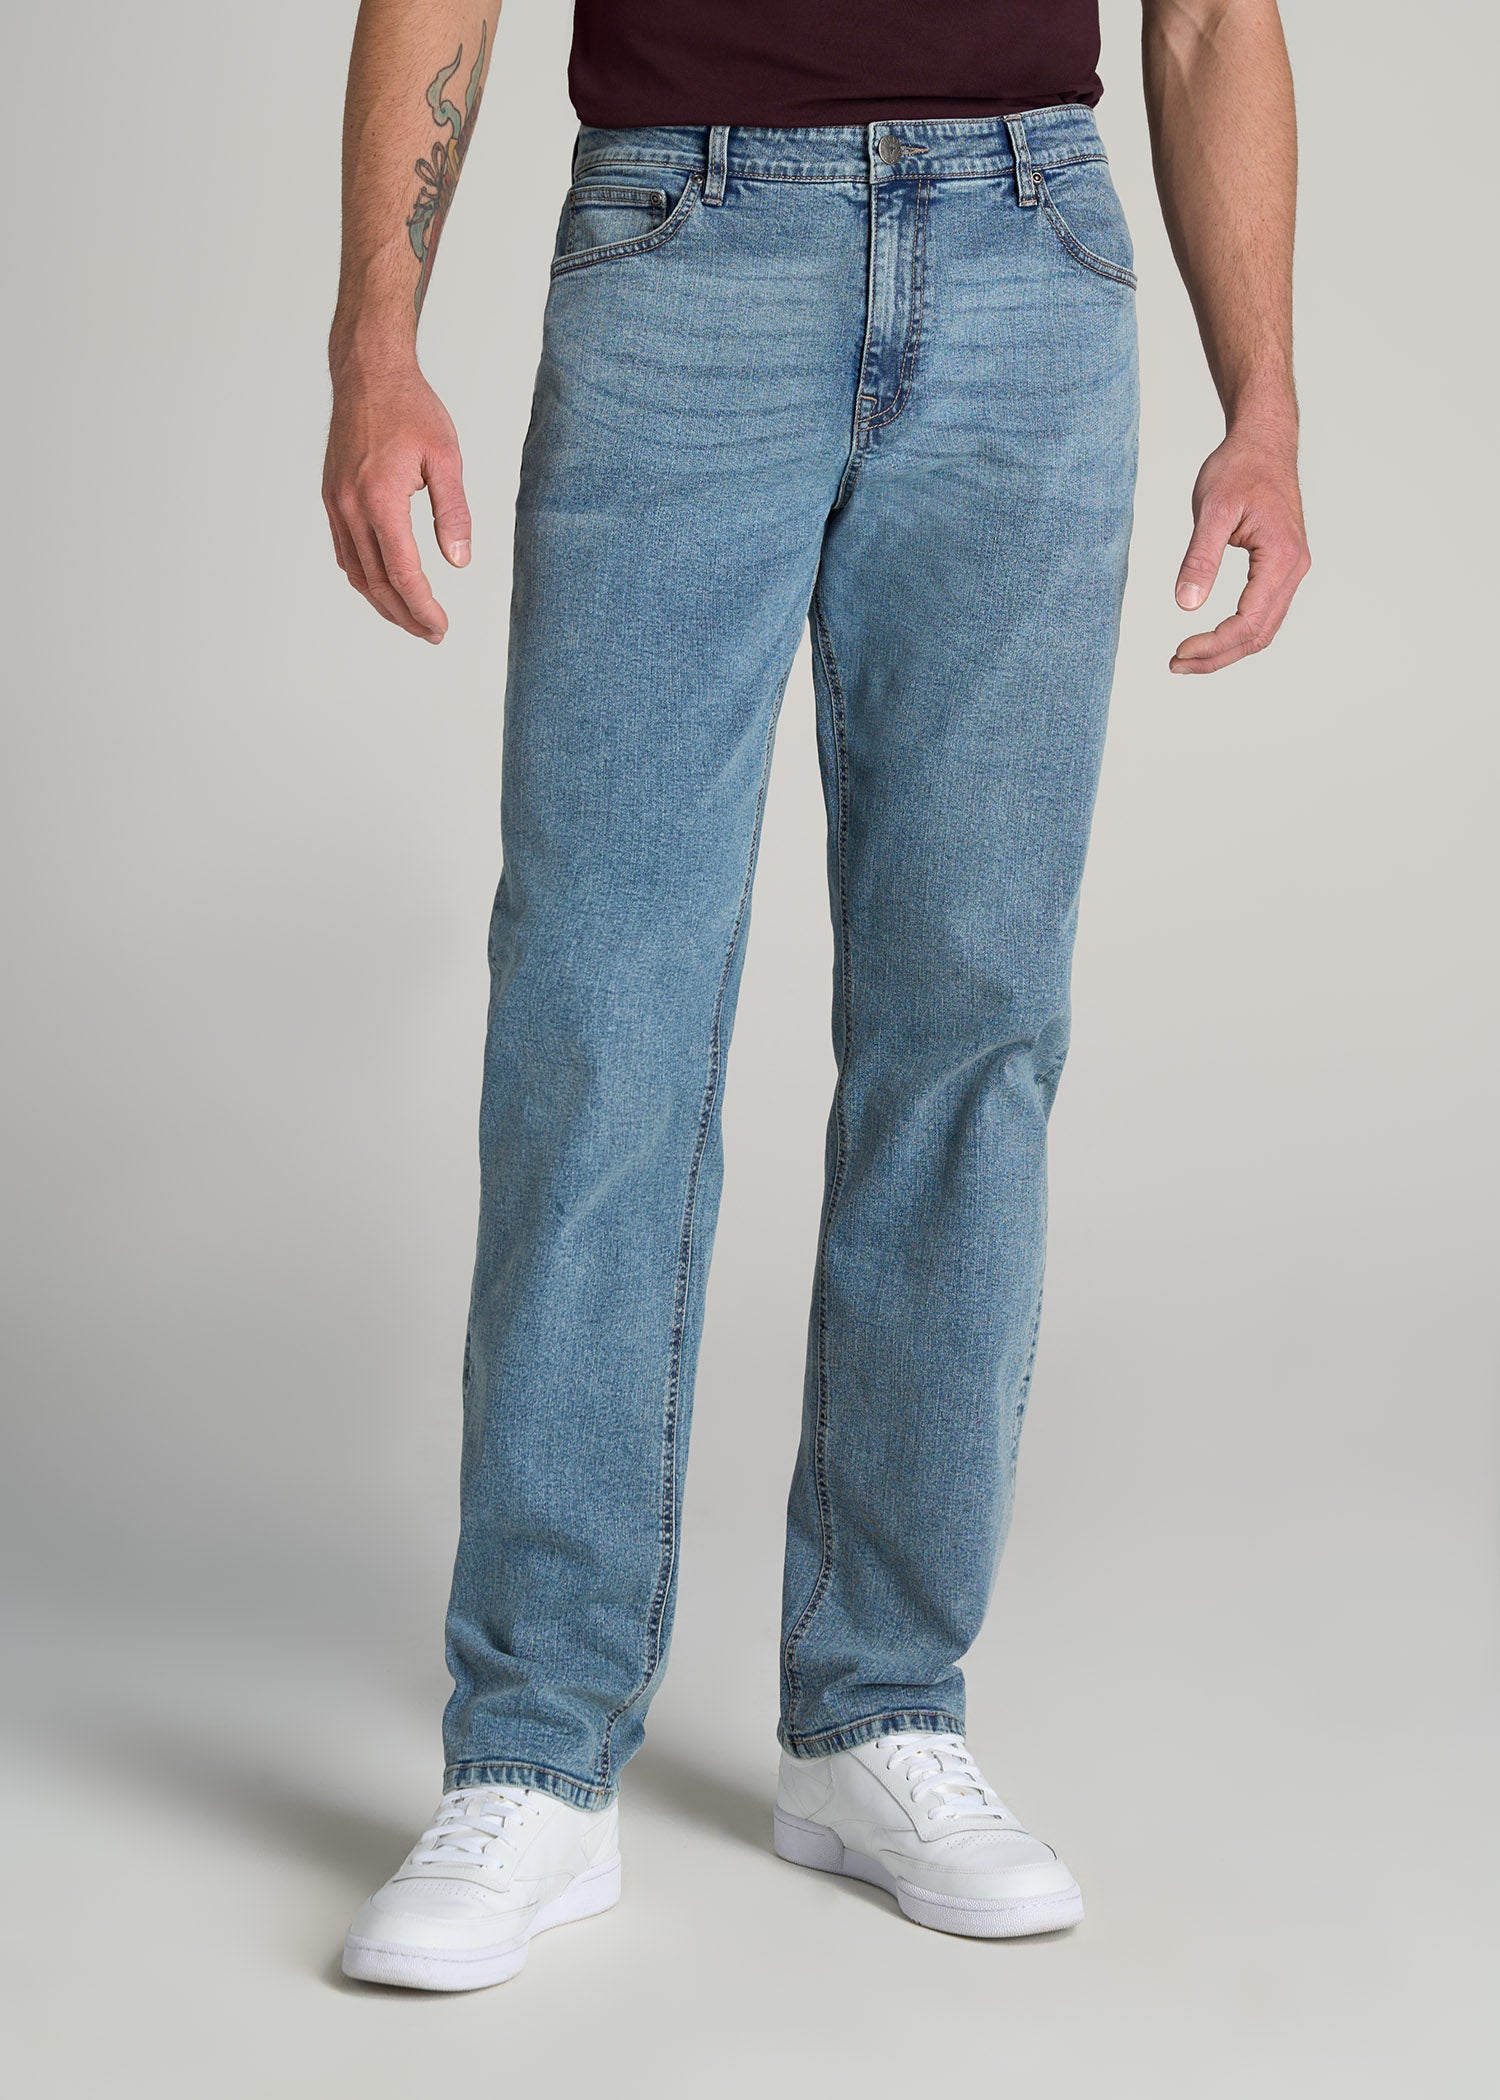 Mason Semi-Relaxed Jeans for Tall Men | American